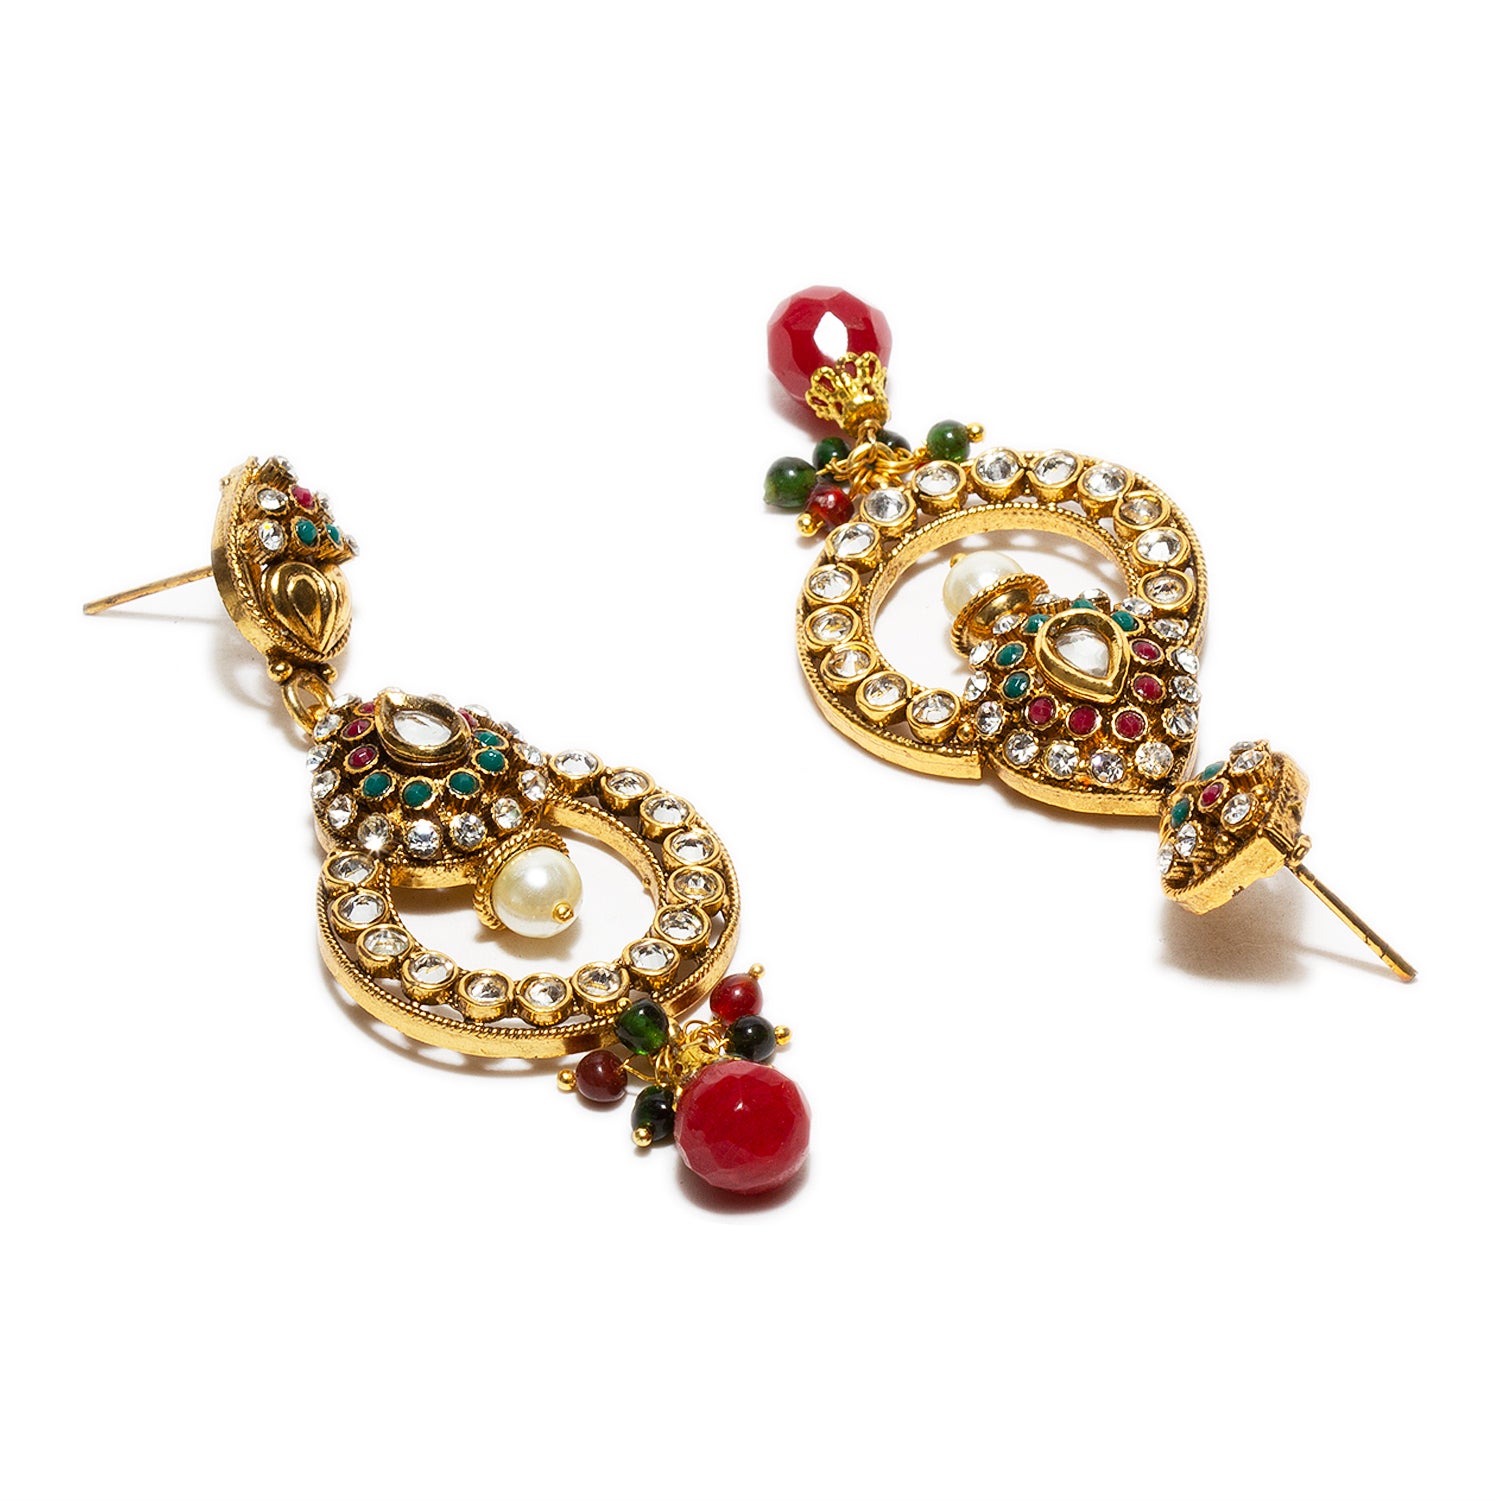 Traditional AD white stone Earrings - Earrings - The Chennai Boutique